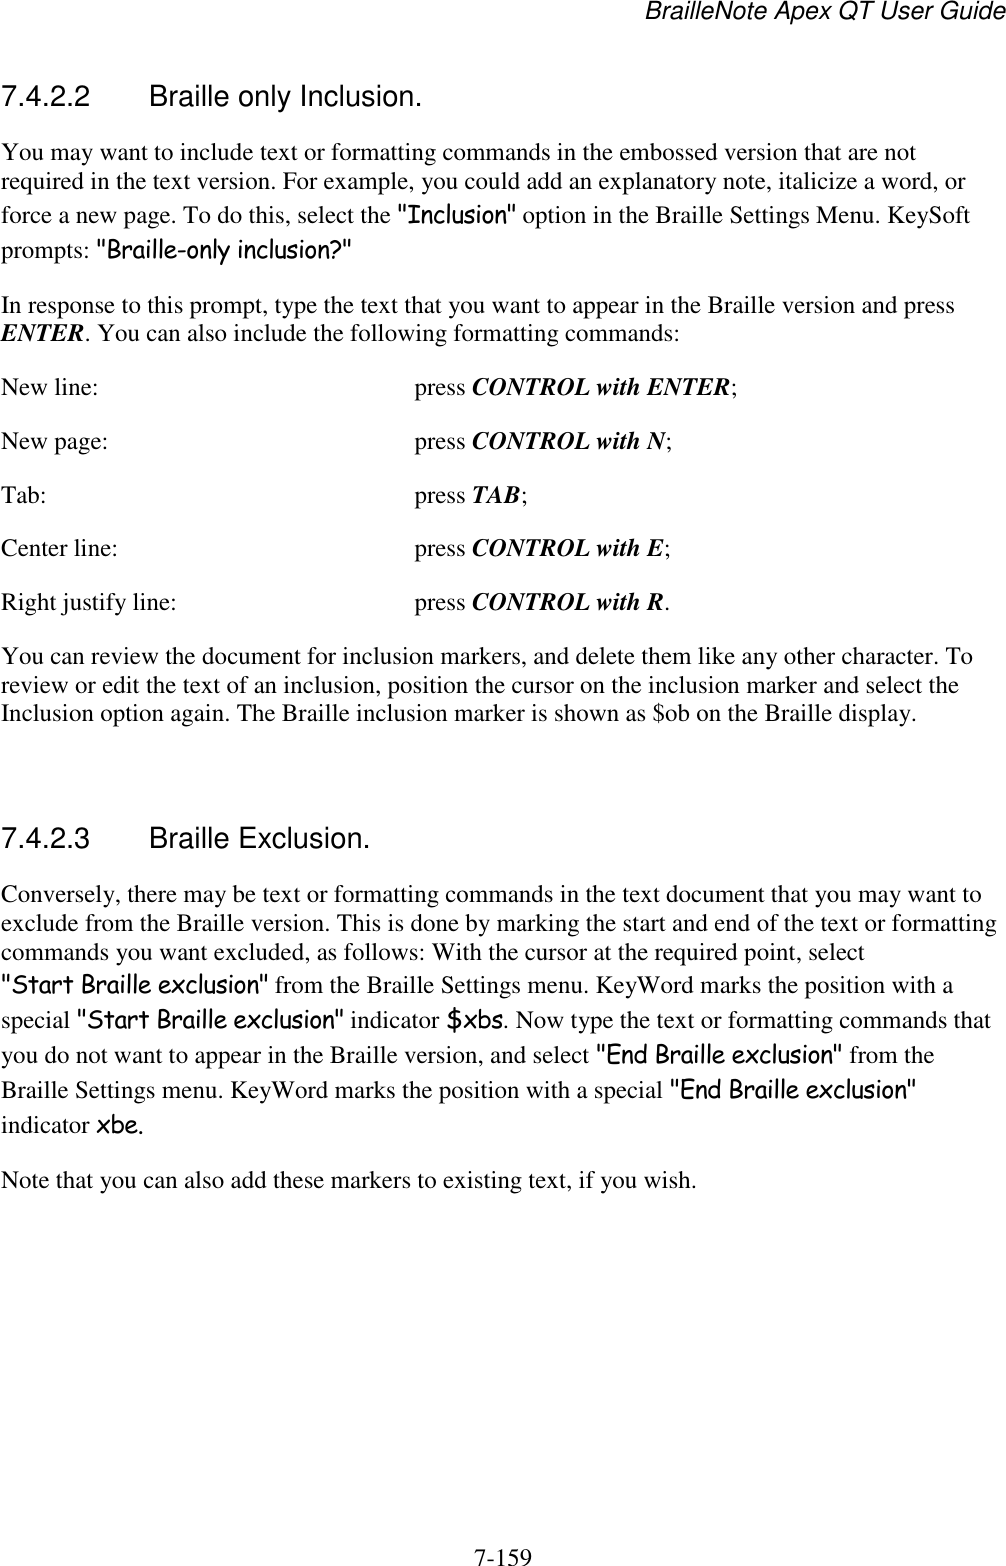 BrailleNote Apex QT User Guide  7-159   7.4.2.2  Braille only Inclusion. You may want to include text or formatting commands in the embossed version that are not required in the text version. For example, you could add an explanatory note, italicize a word, or force a new page. To do this, select the &quot;Inclusion&quot; option in the Braille Settings Menu. KeySoft prompts: &quot;Braille-only inclusion?&quot; In response to this prompt, type the text that you want to appear in the Braille version and press ENTER. You can also include the following formatting commands: New line:  press CONTROL with ENTER; New page:  press CONTROL with N; Tab:  press TAB; Center line:  press CONTROL with E; Right justify line:  press CONTROL with R. You can review the document for inclusion markers, and delete them like any other character. To review or edit the text of an inclusion, position the cursor on the inclusion marker and select the Inclusion option again. The Braille inclusion marker is shown as $ob on the Braille display.   7.4.2.3  Braille Exclusion. Conversely, there may be text or formatting commands in the text document that you may want to exclude from the Braille version. This is done by marking the start and end of the text or formatting commands you want excluded, as follows: With the cursor at the required point, select &quot;Start Braille exclusion&quot; from the Braille Settings menu. KeyWord marks the position with a special &quot;Start Braille exclusion&quot; indicator $xbs. Now type the text or formatting commands that you do not want to appear in the Braille version, and select &quot;End Braille exclusion&quot; from the Braille Settings menu. KeyWord marks the position with a special &quot;End Braille exclusion&quot; indicator xbe. Note that you can also add these markers to existing text, if you wish.   